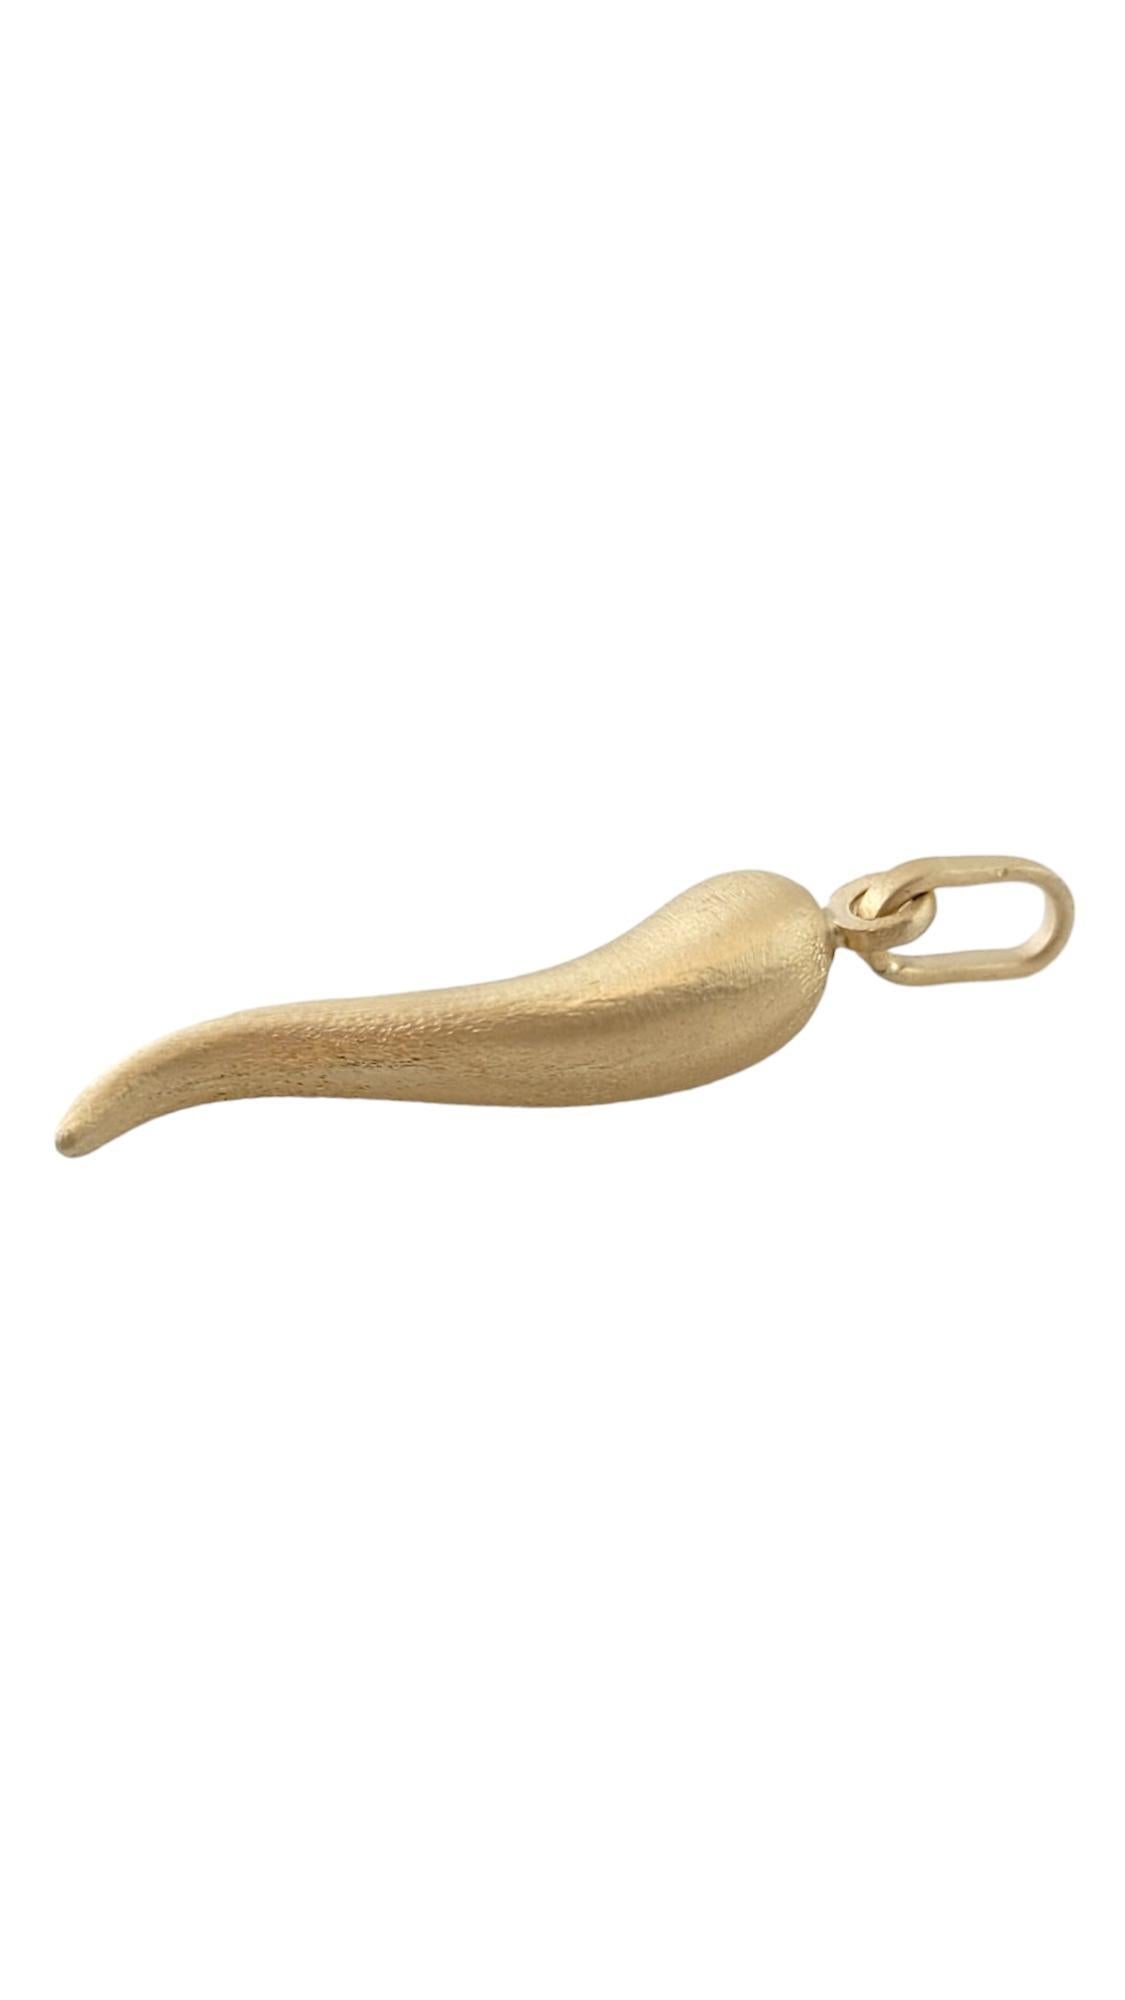 Vintage 14K Yellow Gold Italian Horn Pendant

You absolutely need this gorgeous 14K gold Italian horn pendant!

Size: 28.27mm X 8.11mm X 5.2mm
Length w/ bail: 34.0mm

Weight: 0.8 dwt/ 1.3 g

Hallmark: 14K

Very good condition, professionally